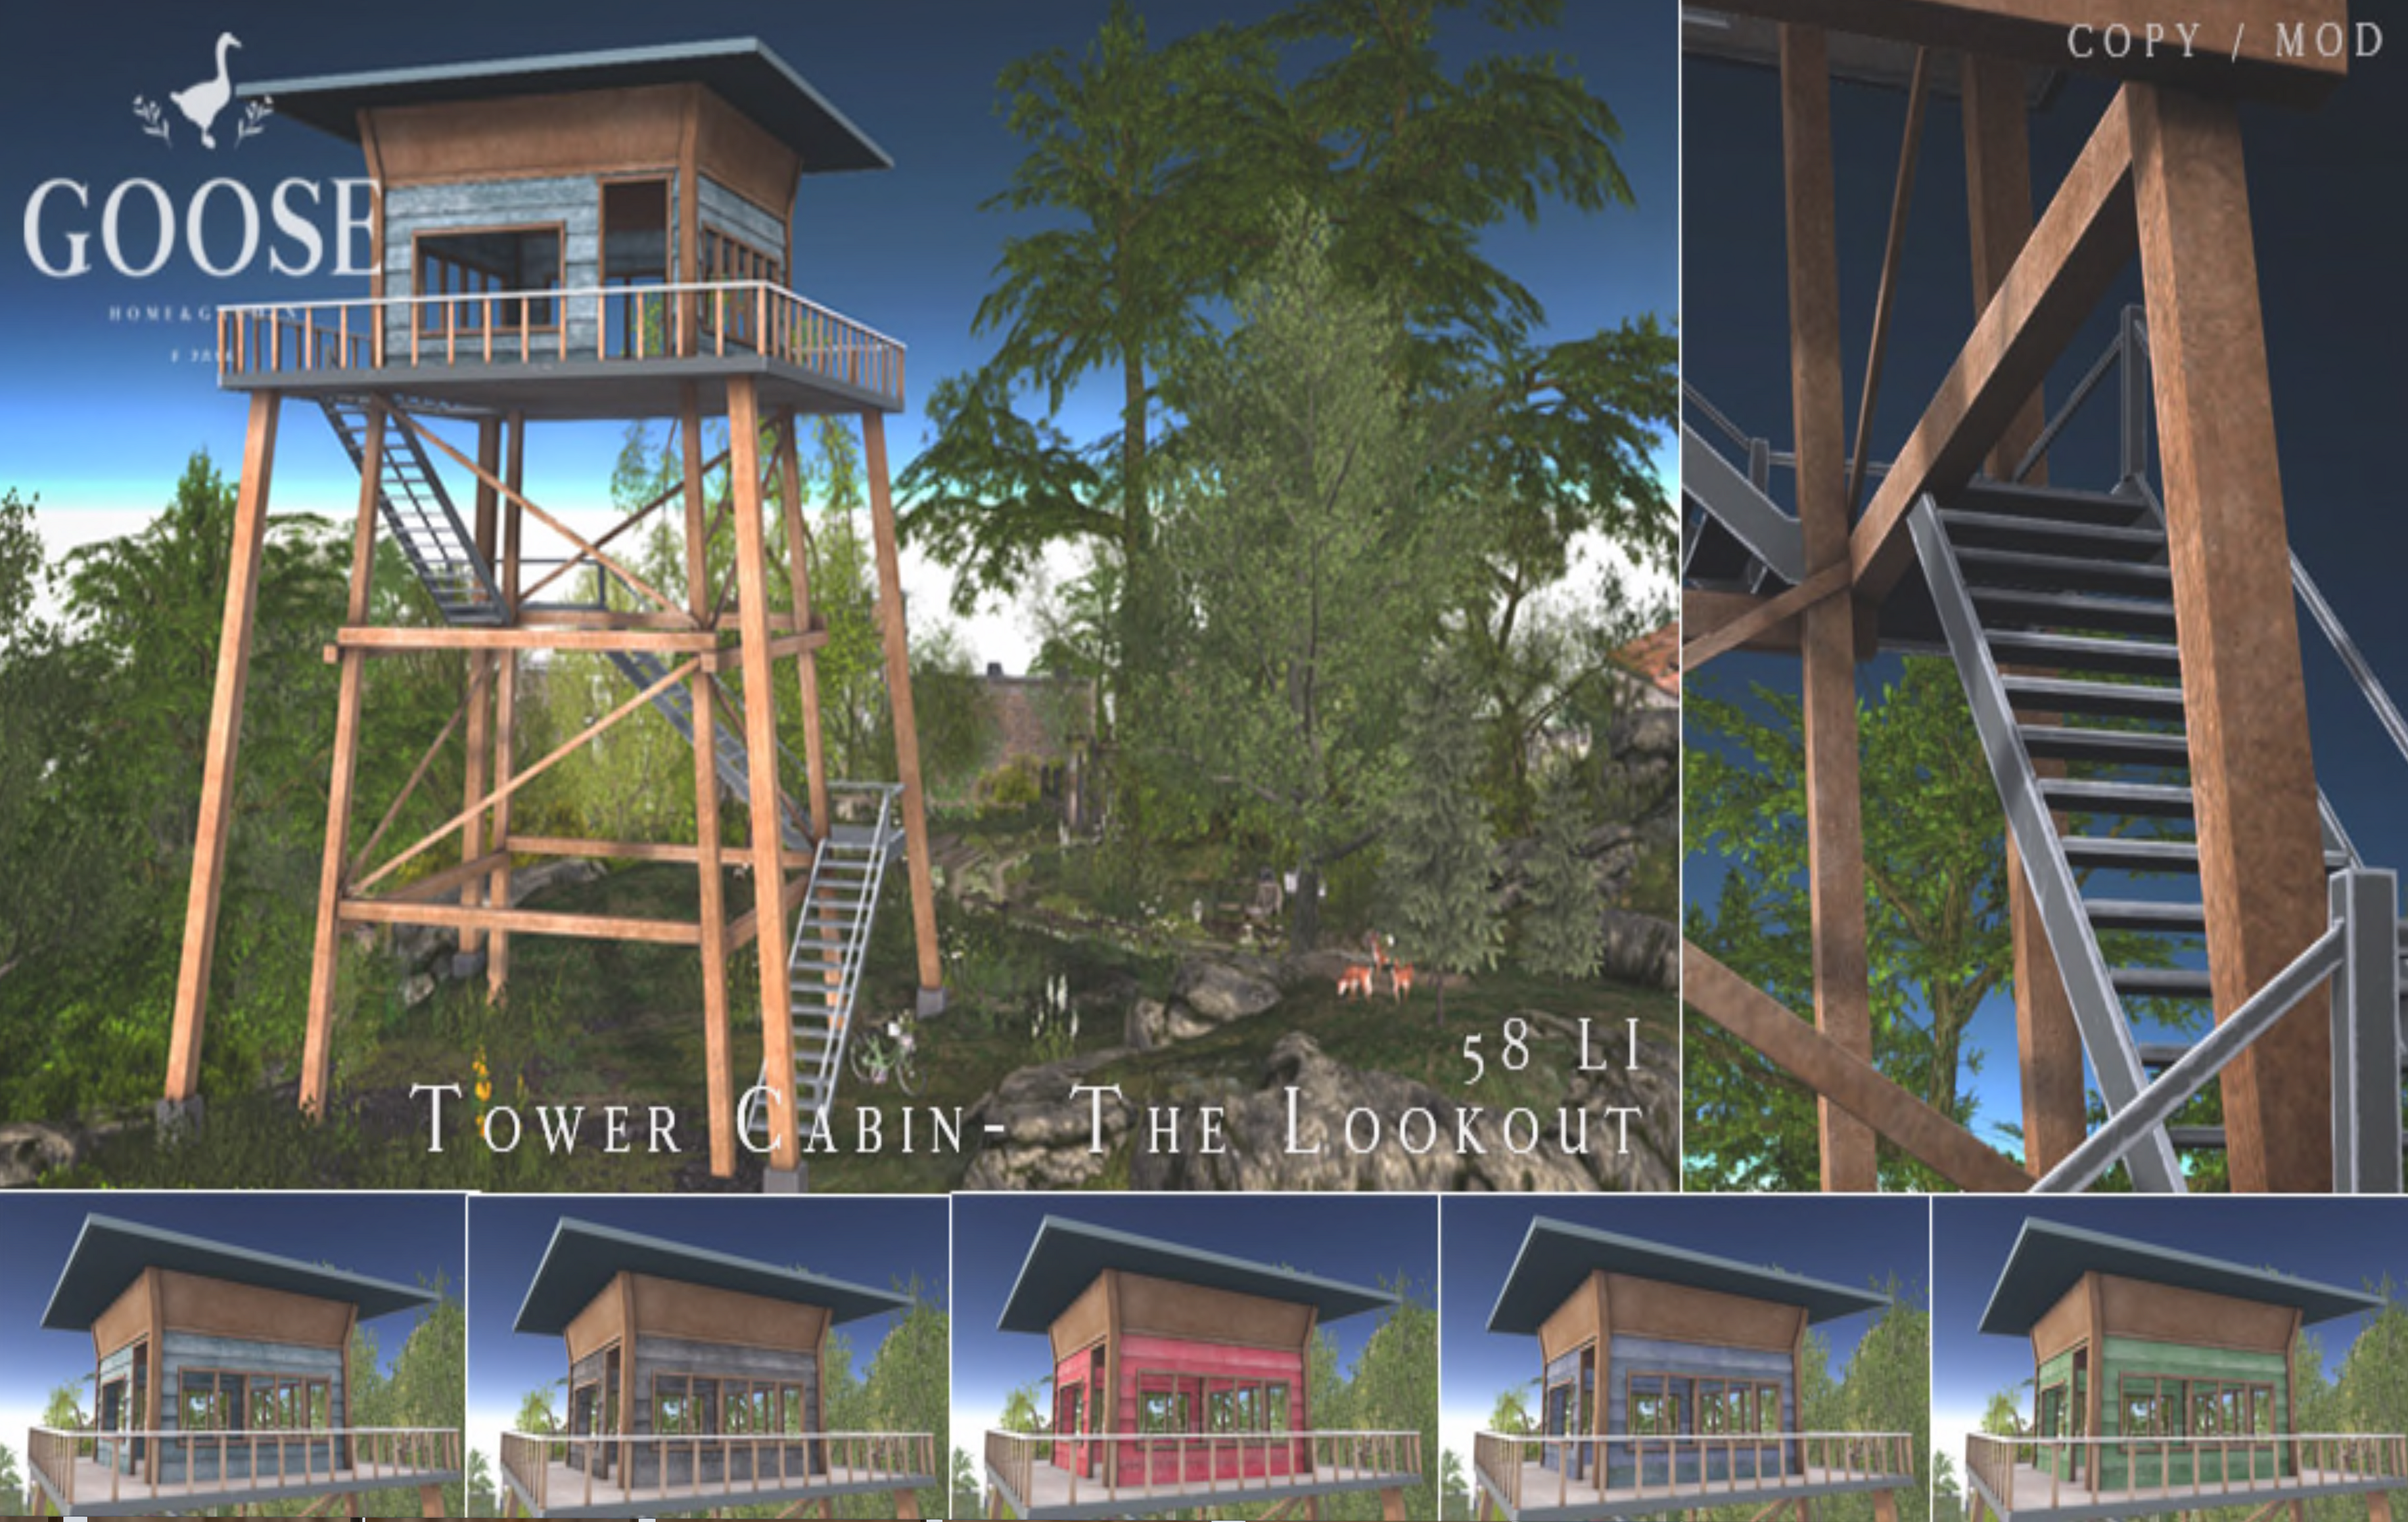 Goose – Tower Cabin – The Lookout